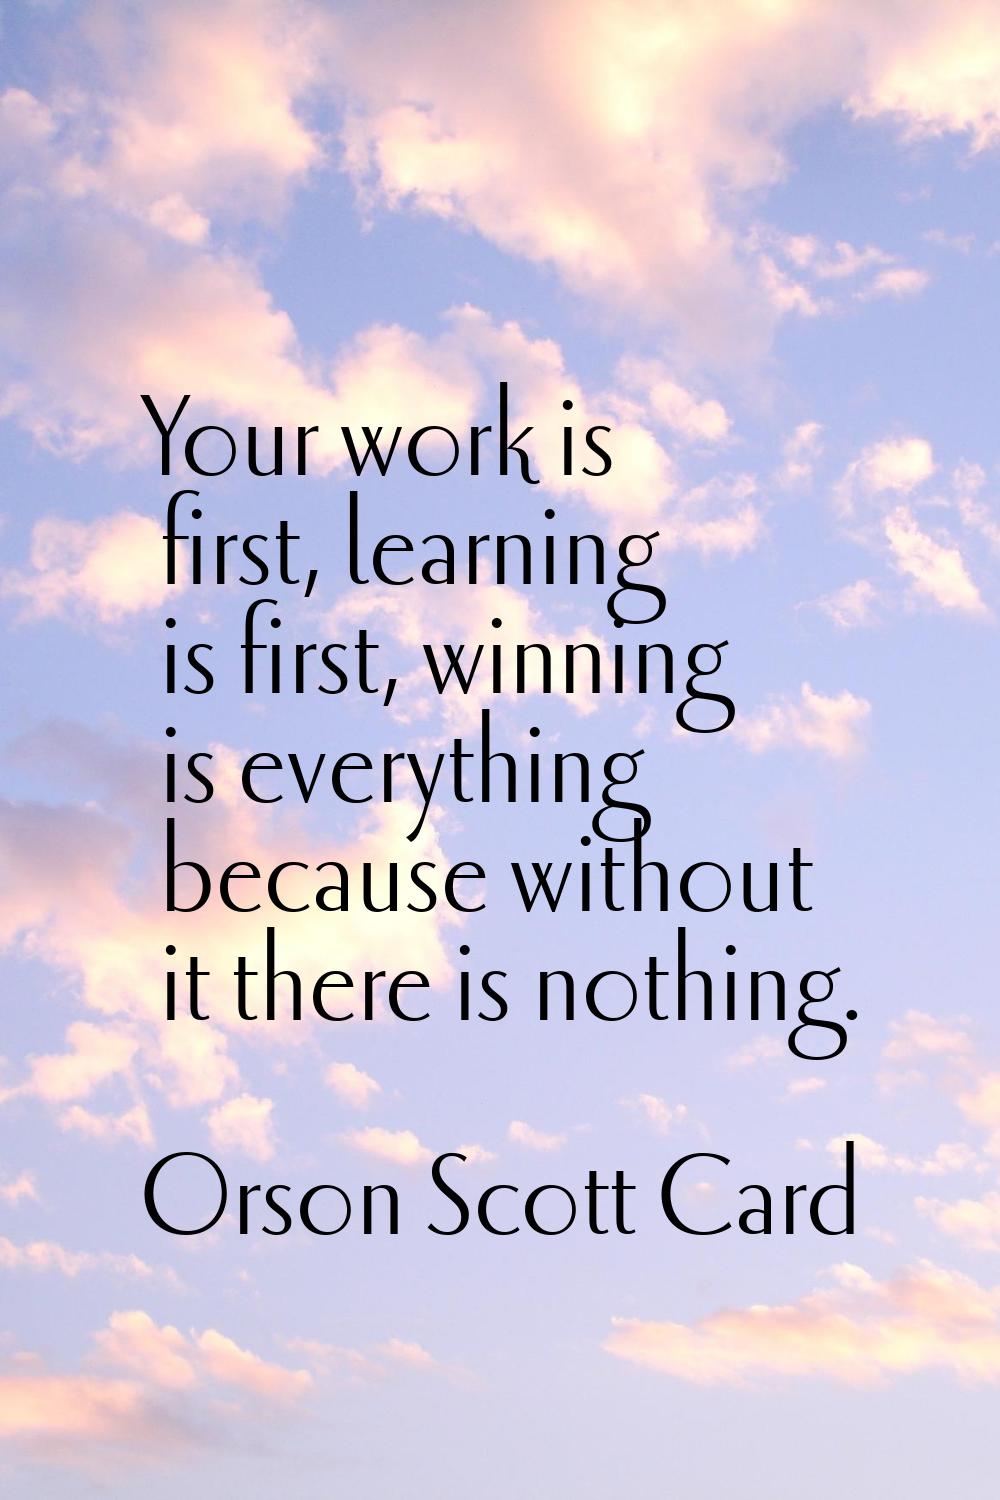 Your work is first, learning is first, winning is everything because without it there is nothing.